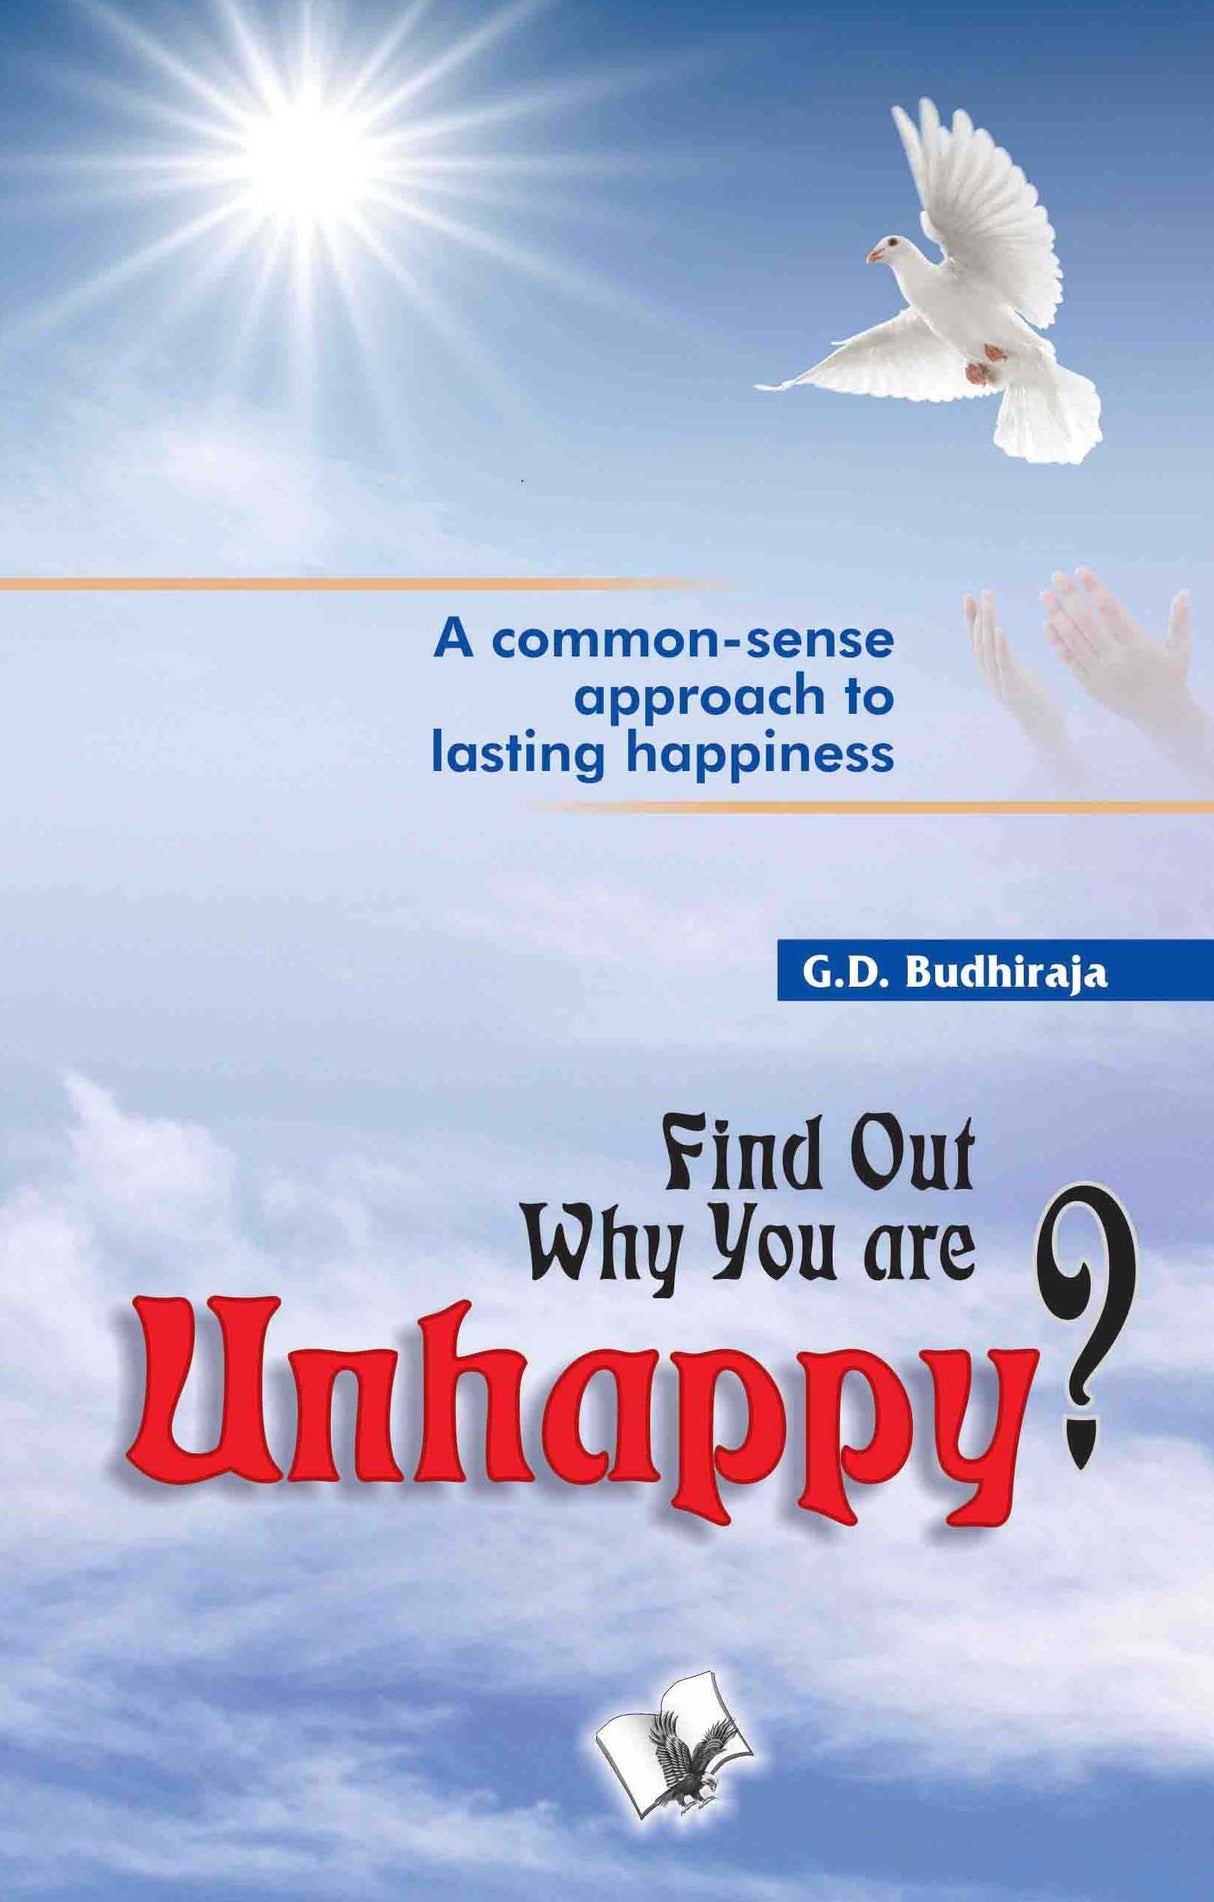 Find Out Why You Are Unhappy: Start Living and enjoy life